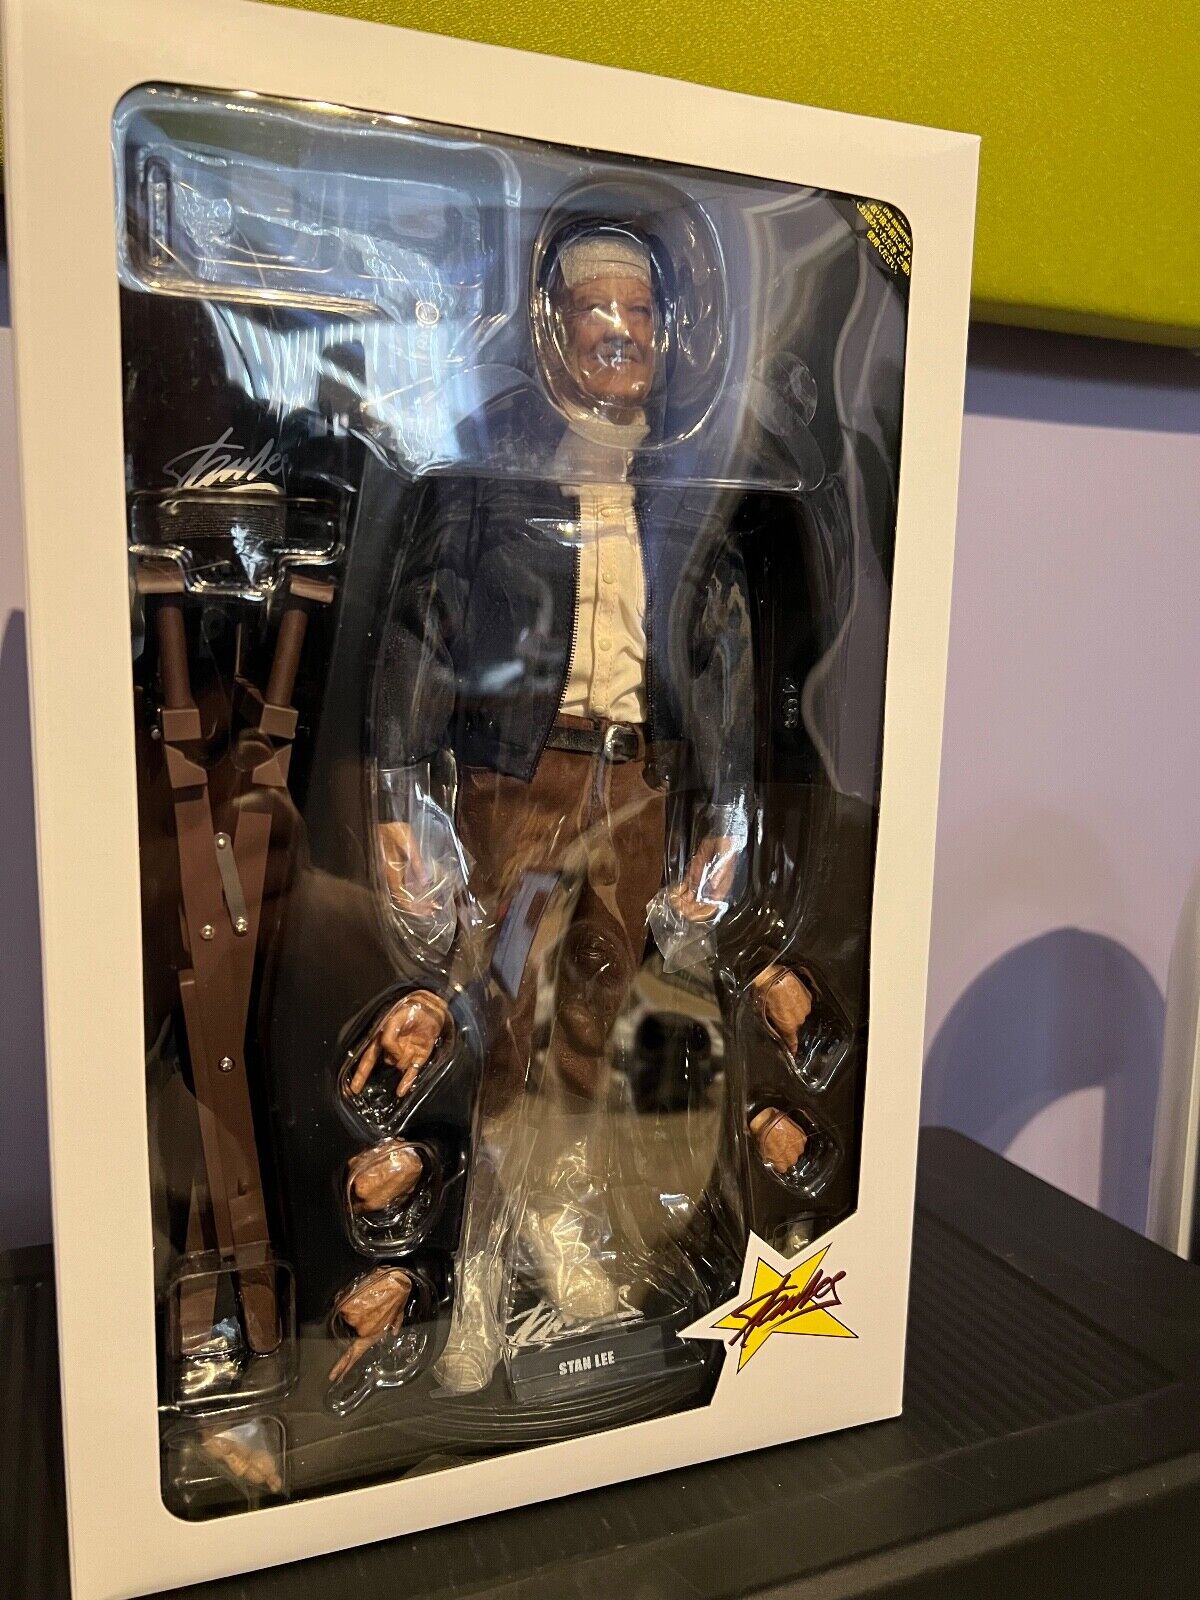 STAN LEE Sixth Scale Figure by Hot Toys MMS327 - SIGNED by Stan Lee